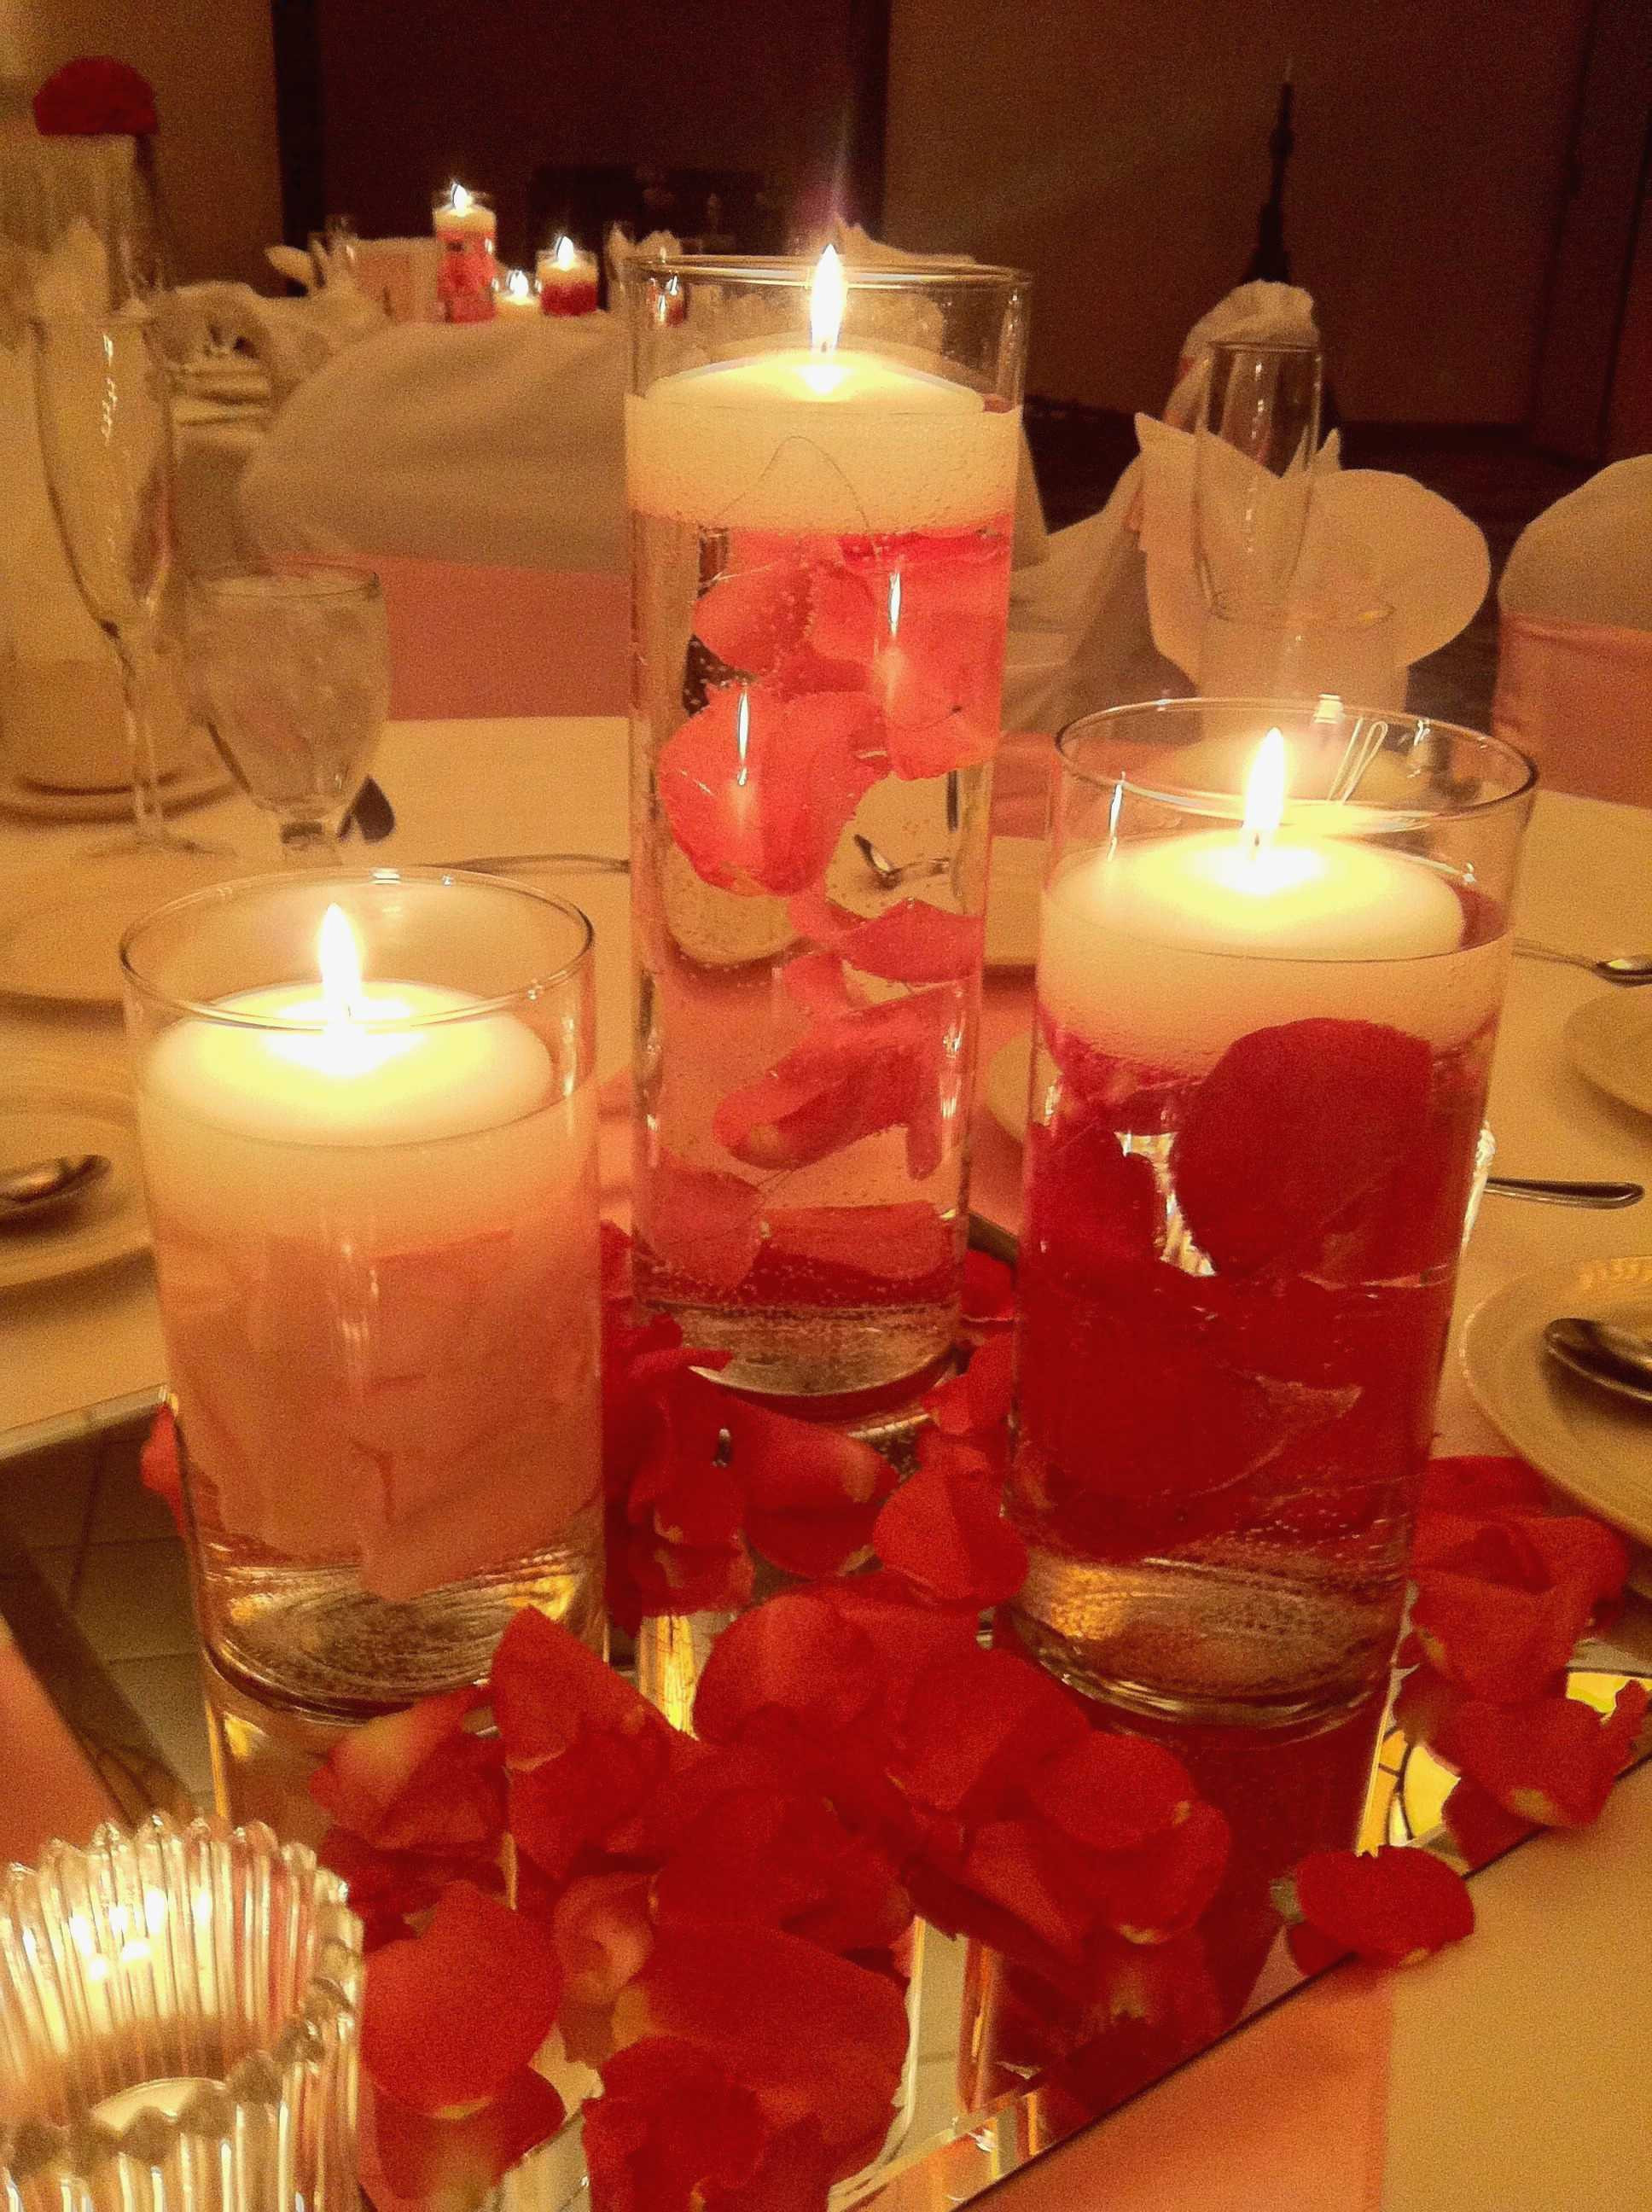 29 Fantastic Cheap Vase Centerpiece Ideas 2024 free download cheap vase centerpiece ideas of wedding favor gifts lovely vases vase centerpieces ideas clear pertaining to wedding favor gifts new wedding wedding party favors ideas beautiful furniture co